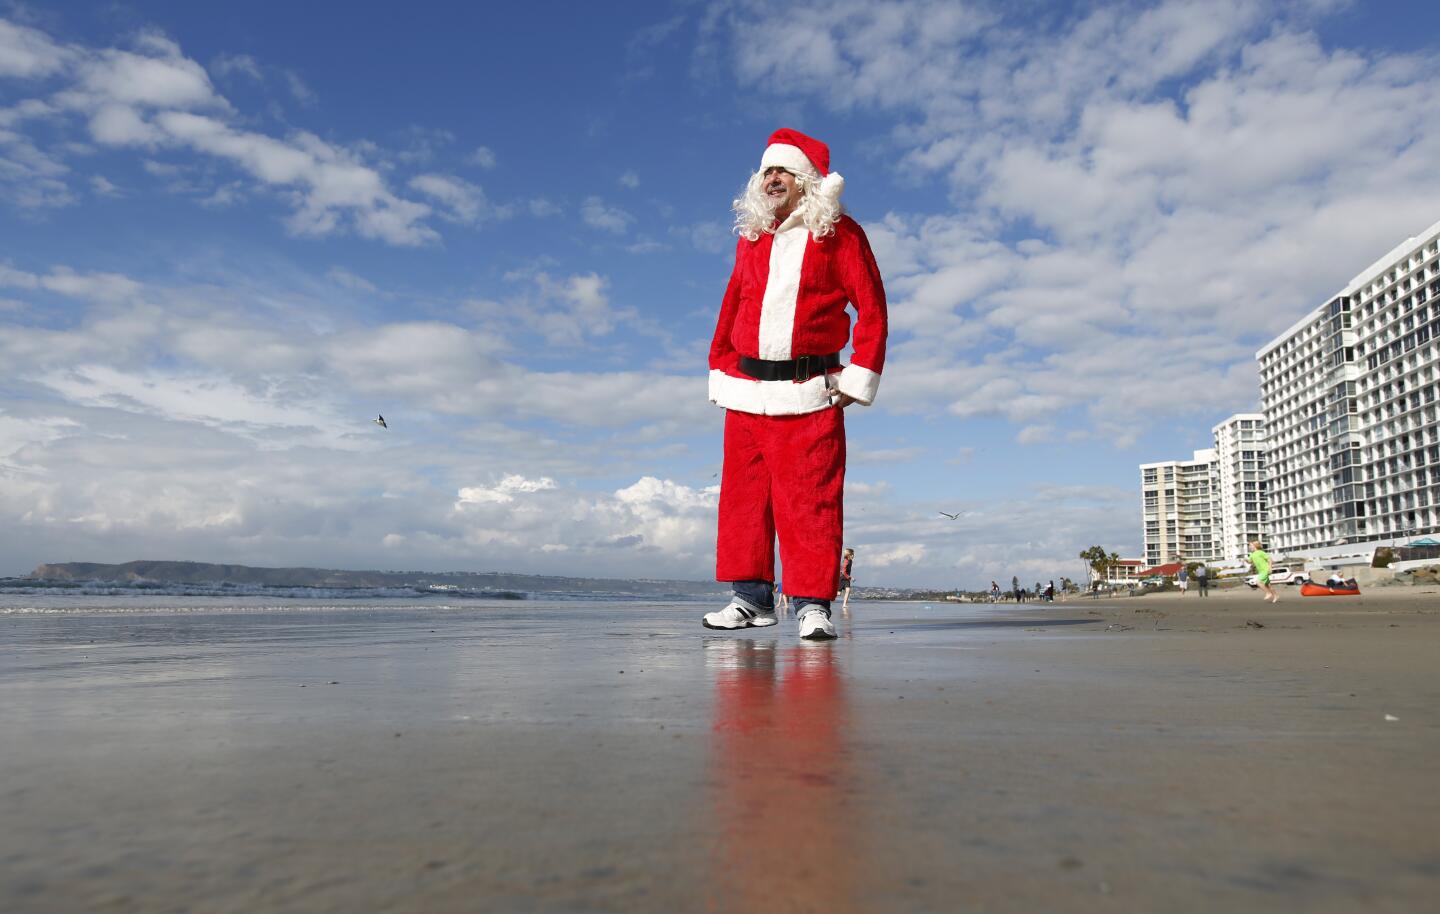 Alan Zada, dressed as Santa Claus, came down to greet surfers during the 9th Annual URT Santa Surf Off and Toy Drive in Coronado on Dec. 24, 2019.